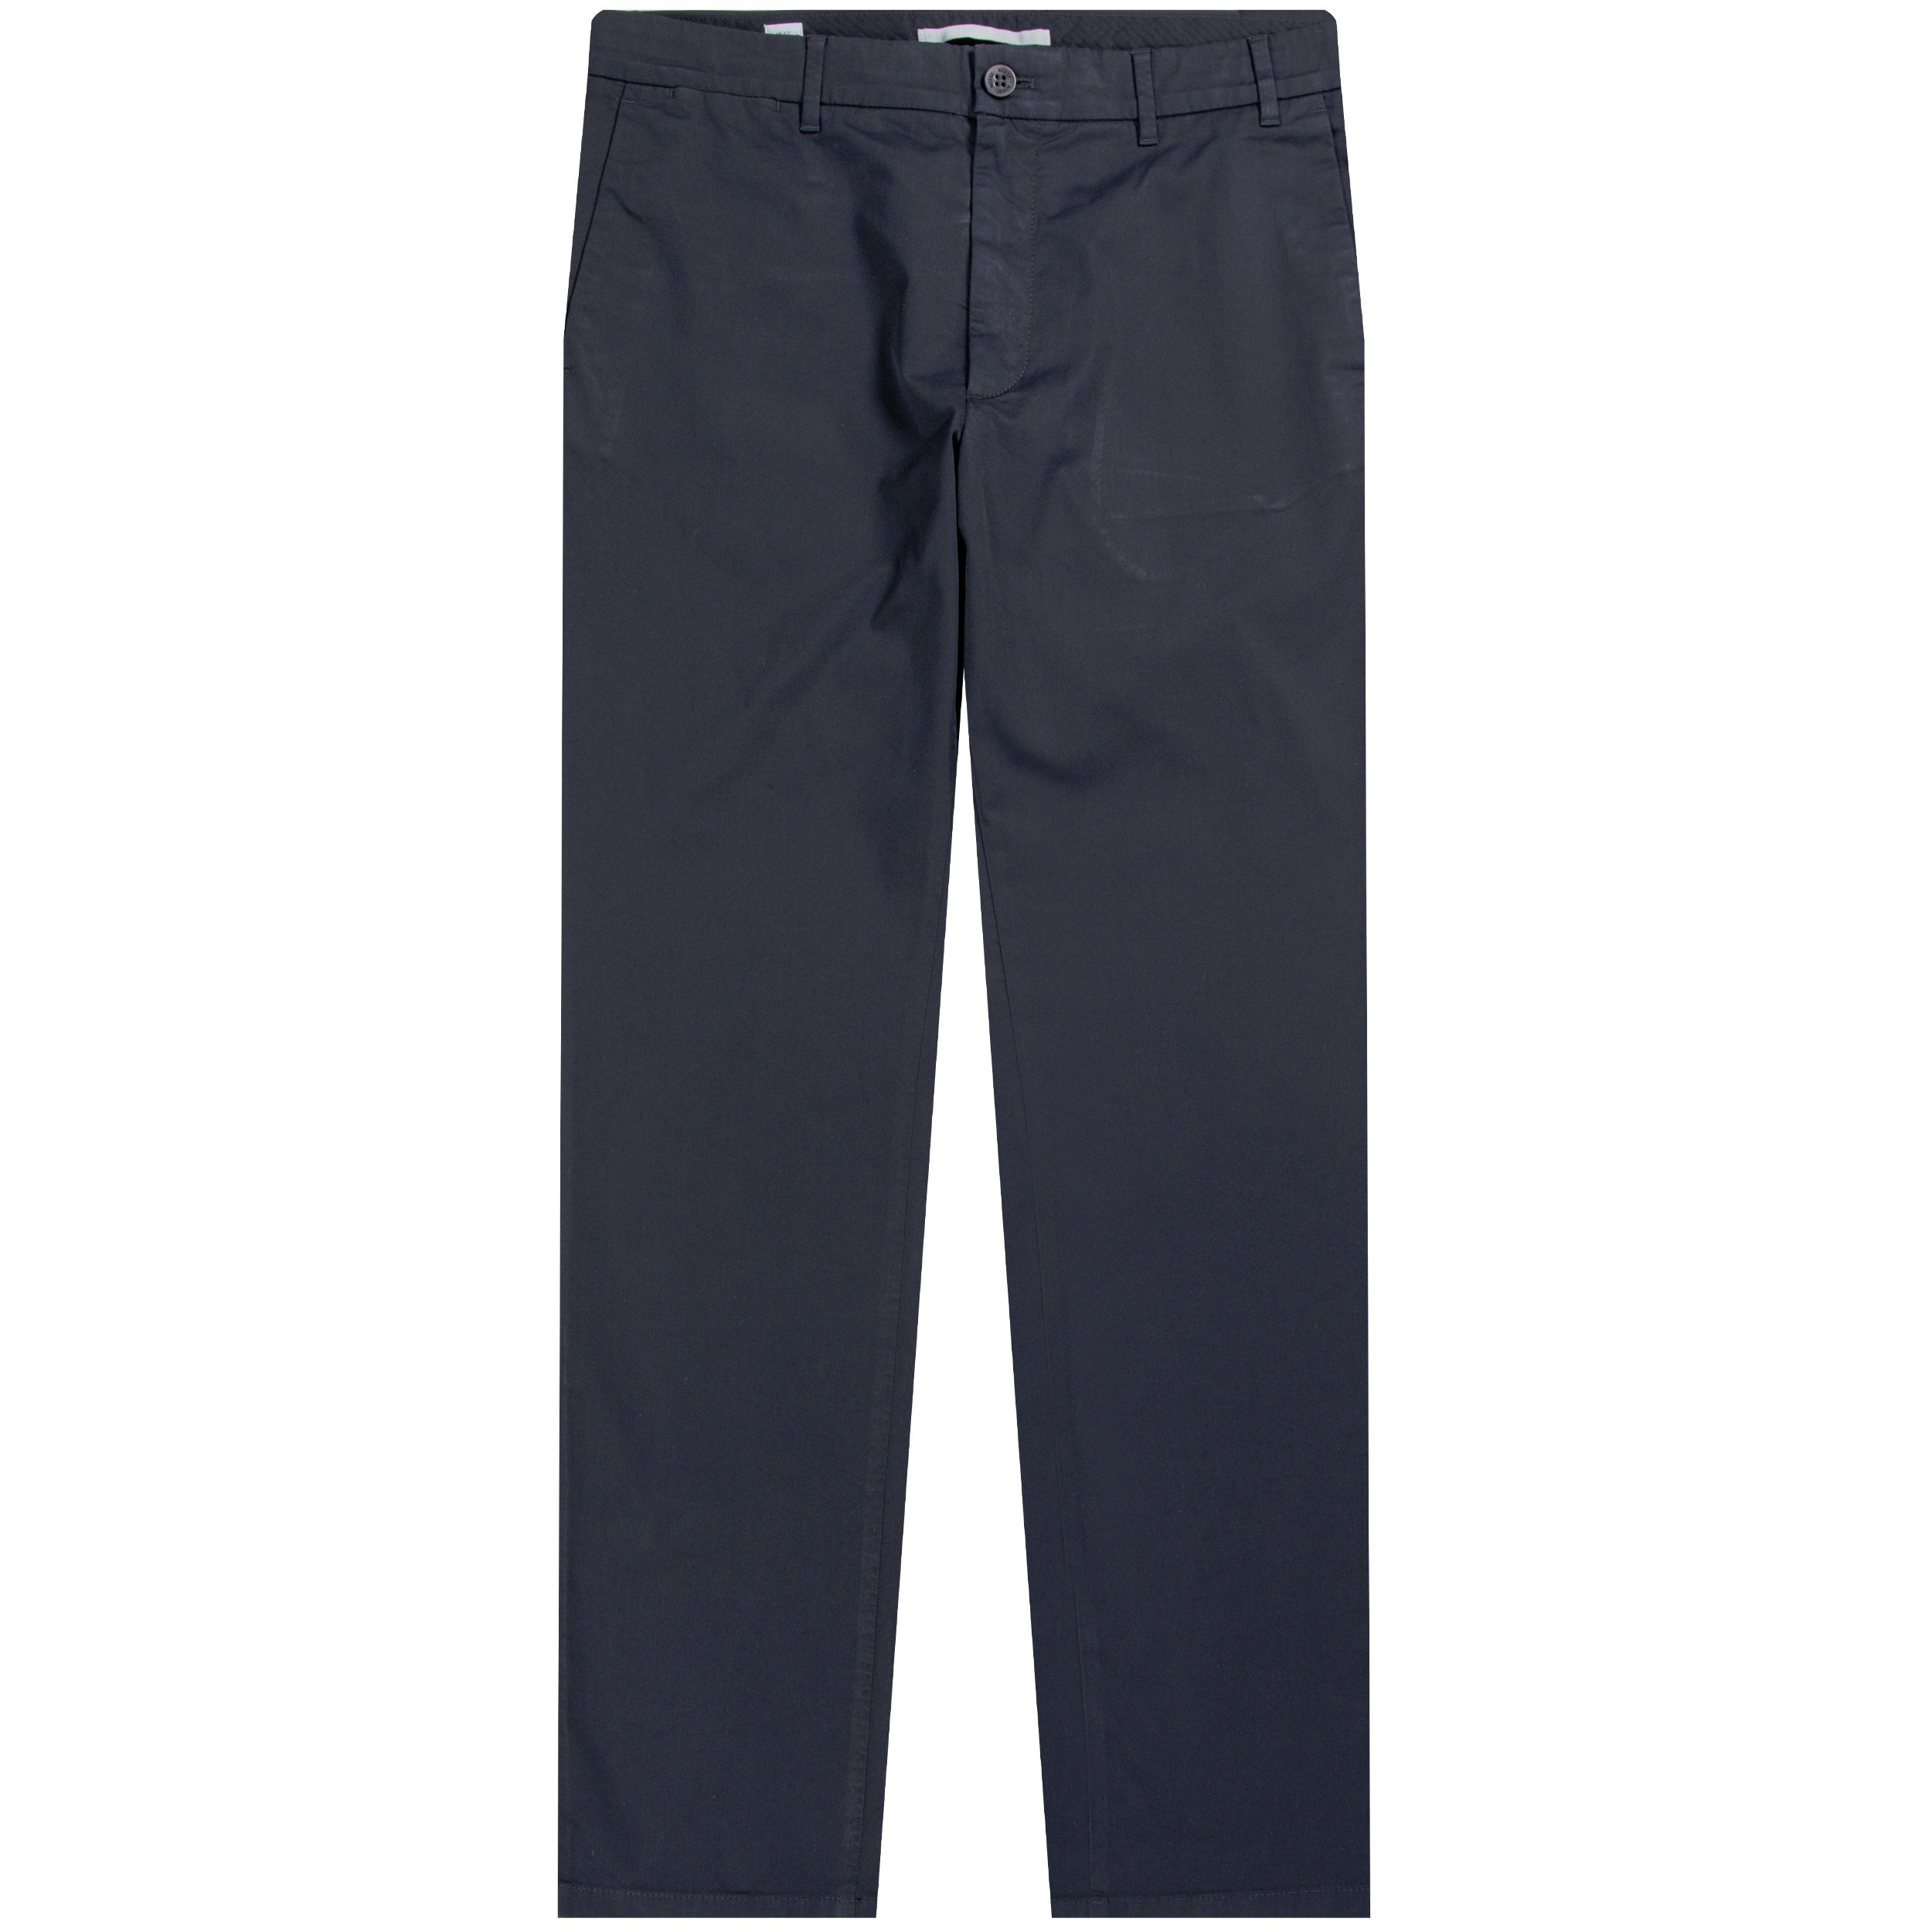 Norse Projects 'Aros' Slim Light Stretch Chinos Navy